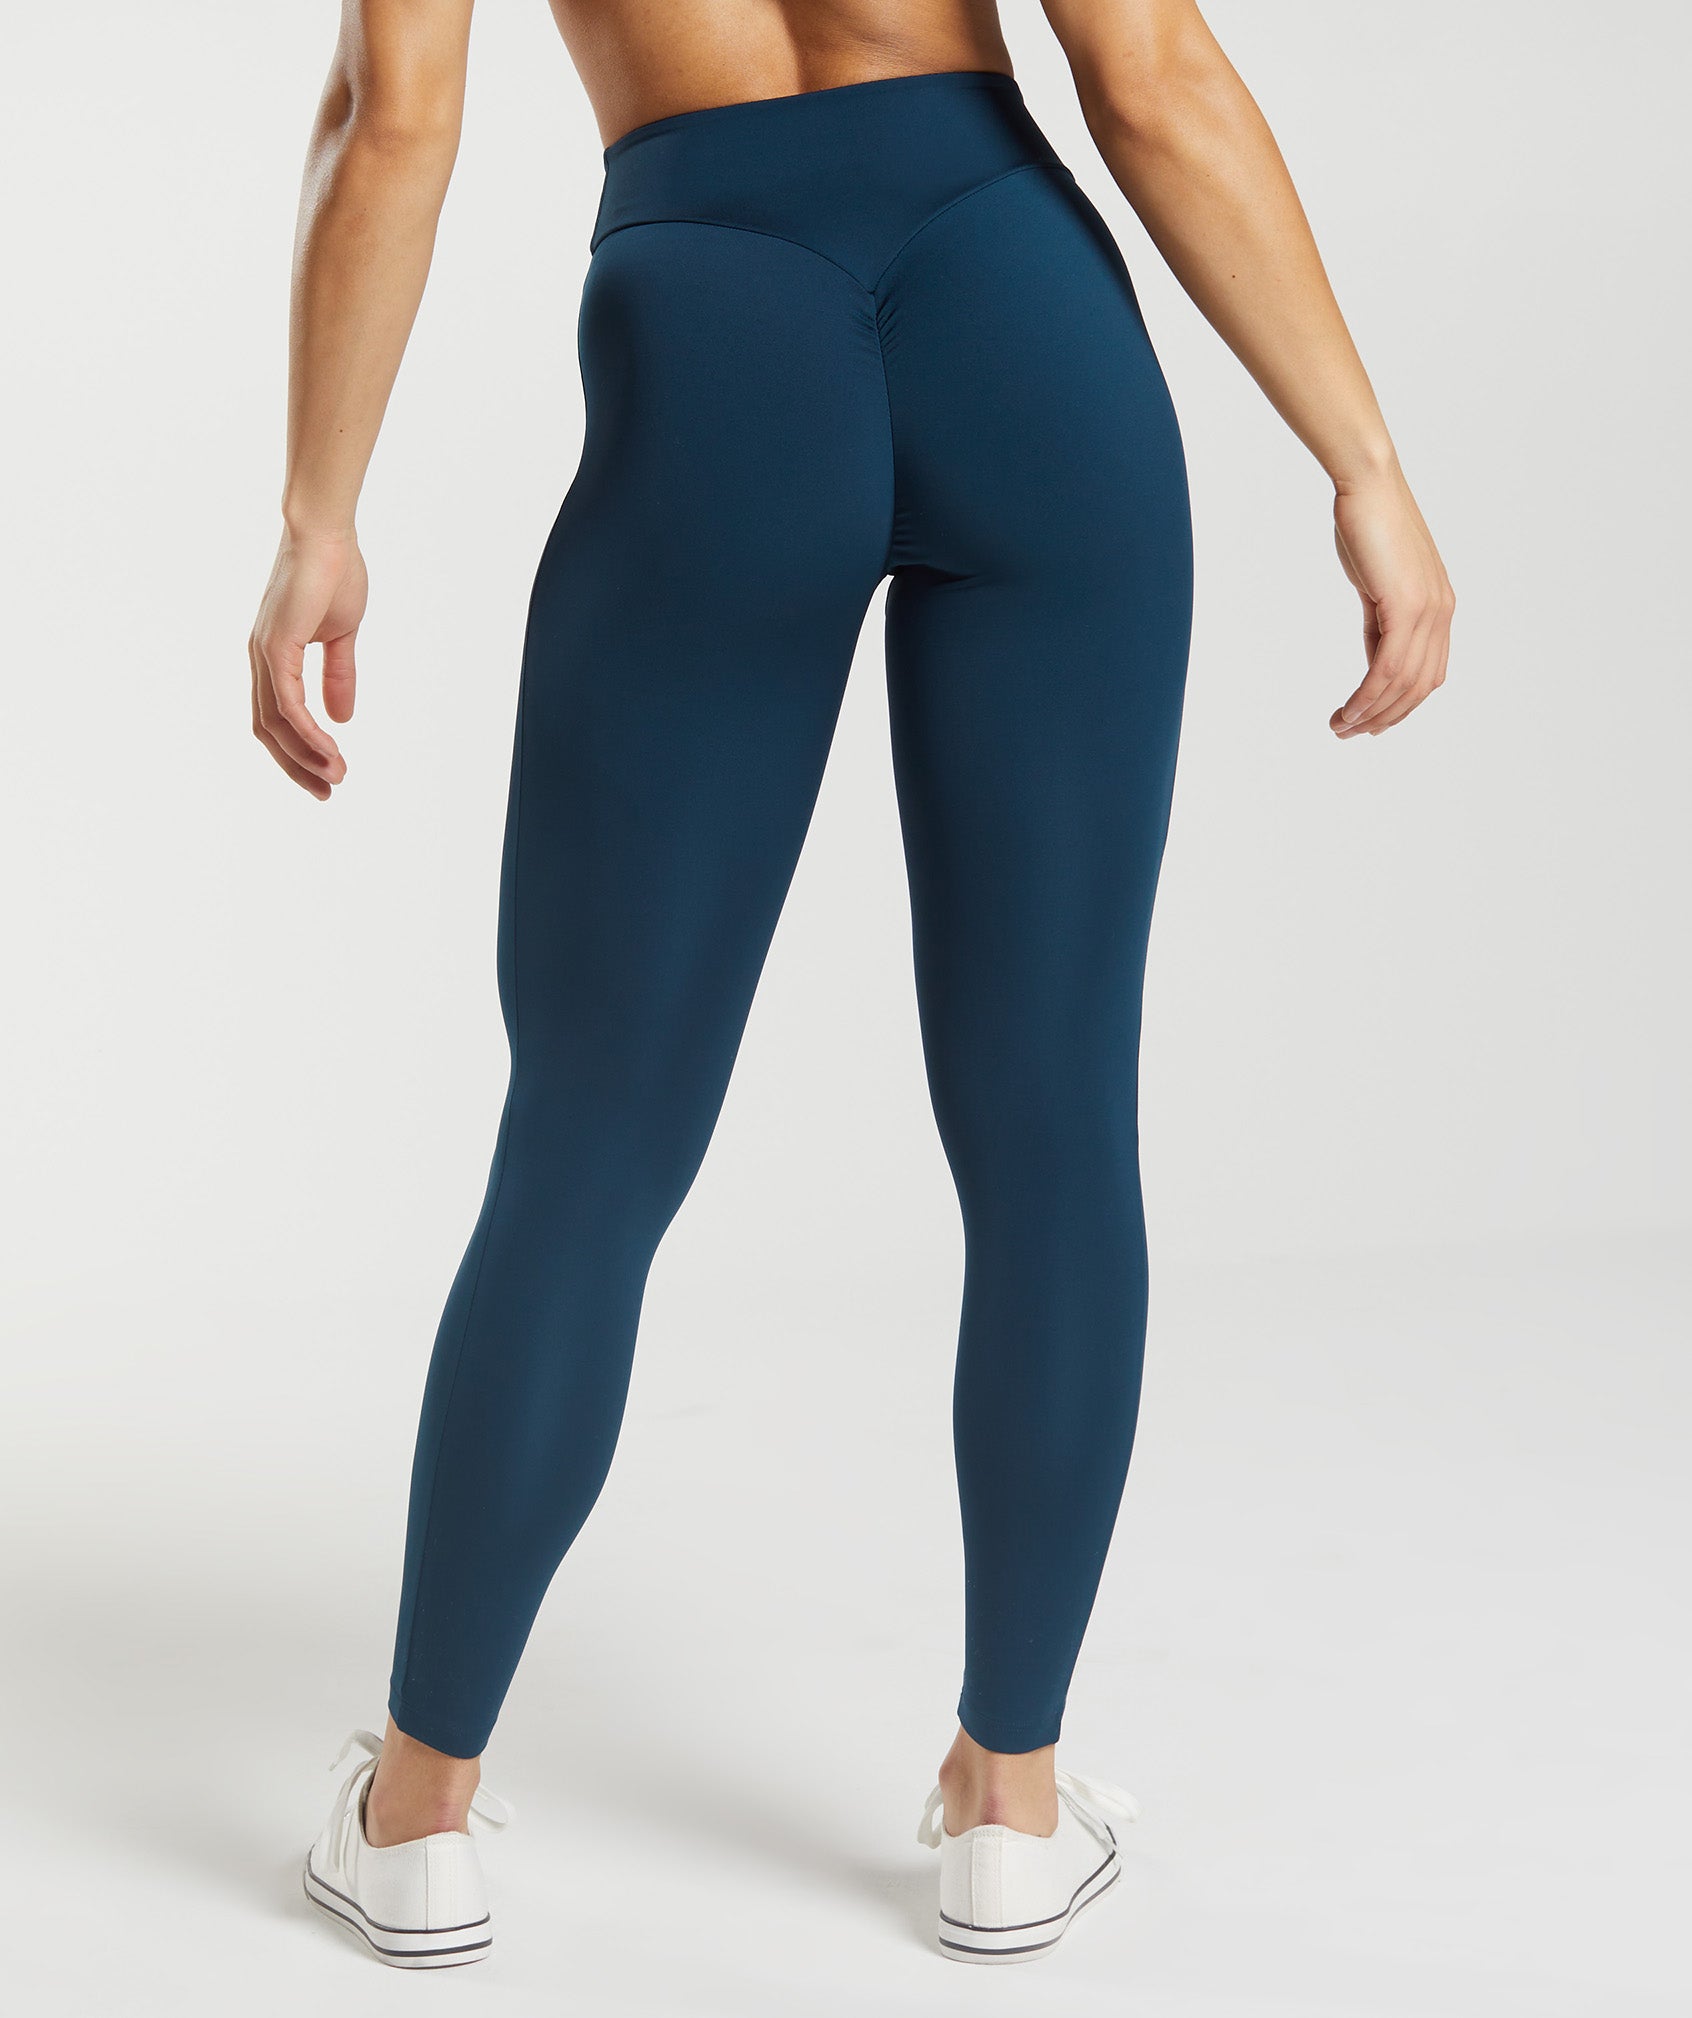 Leggins Navy Large Selection To Discover